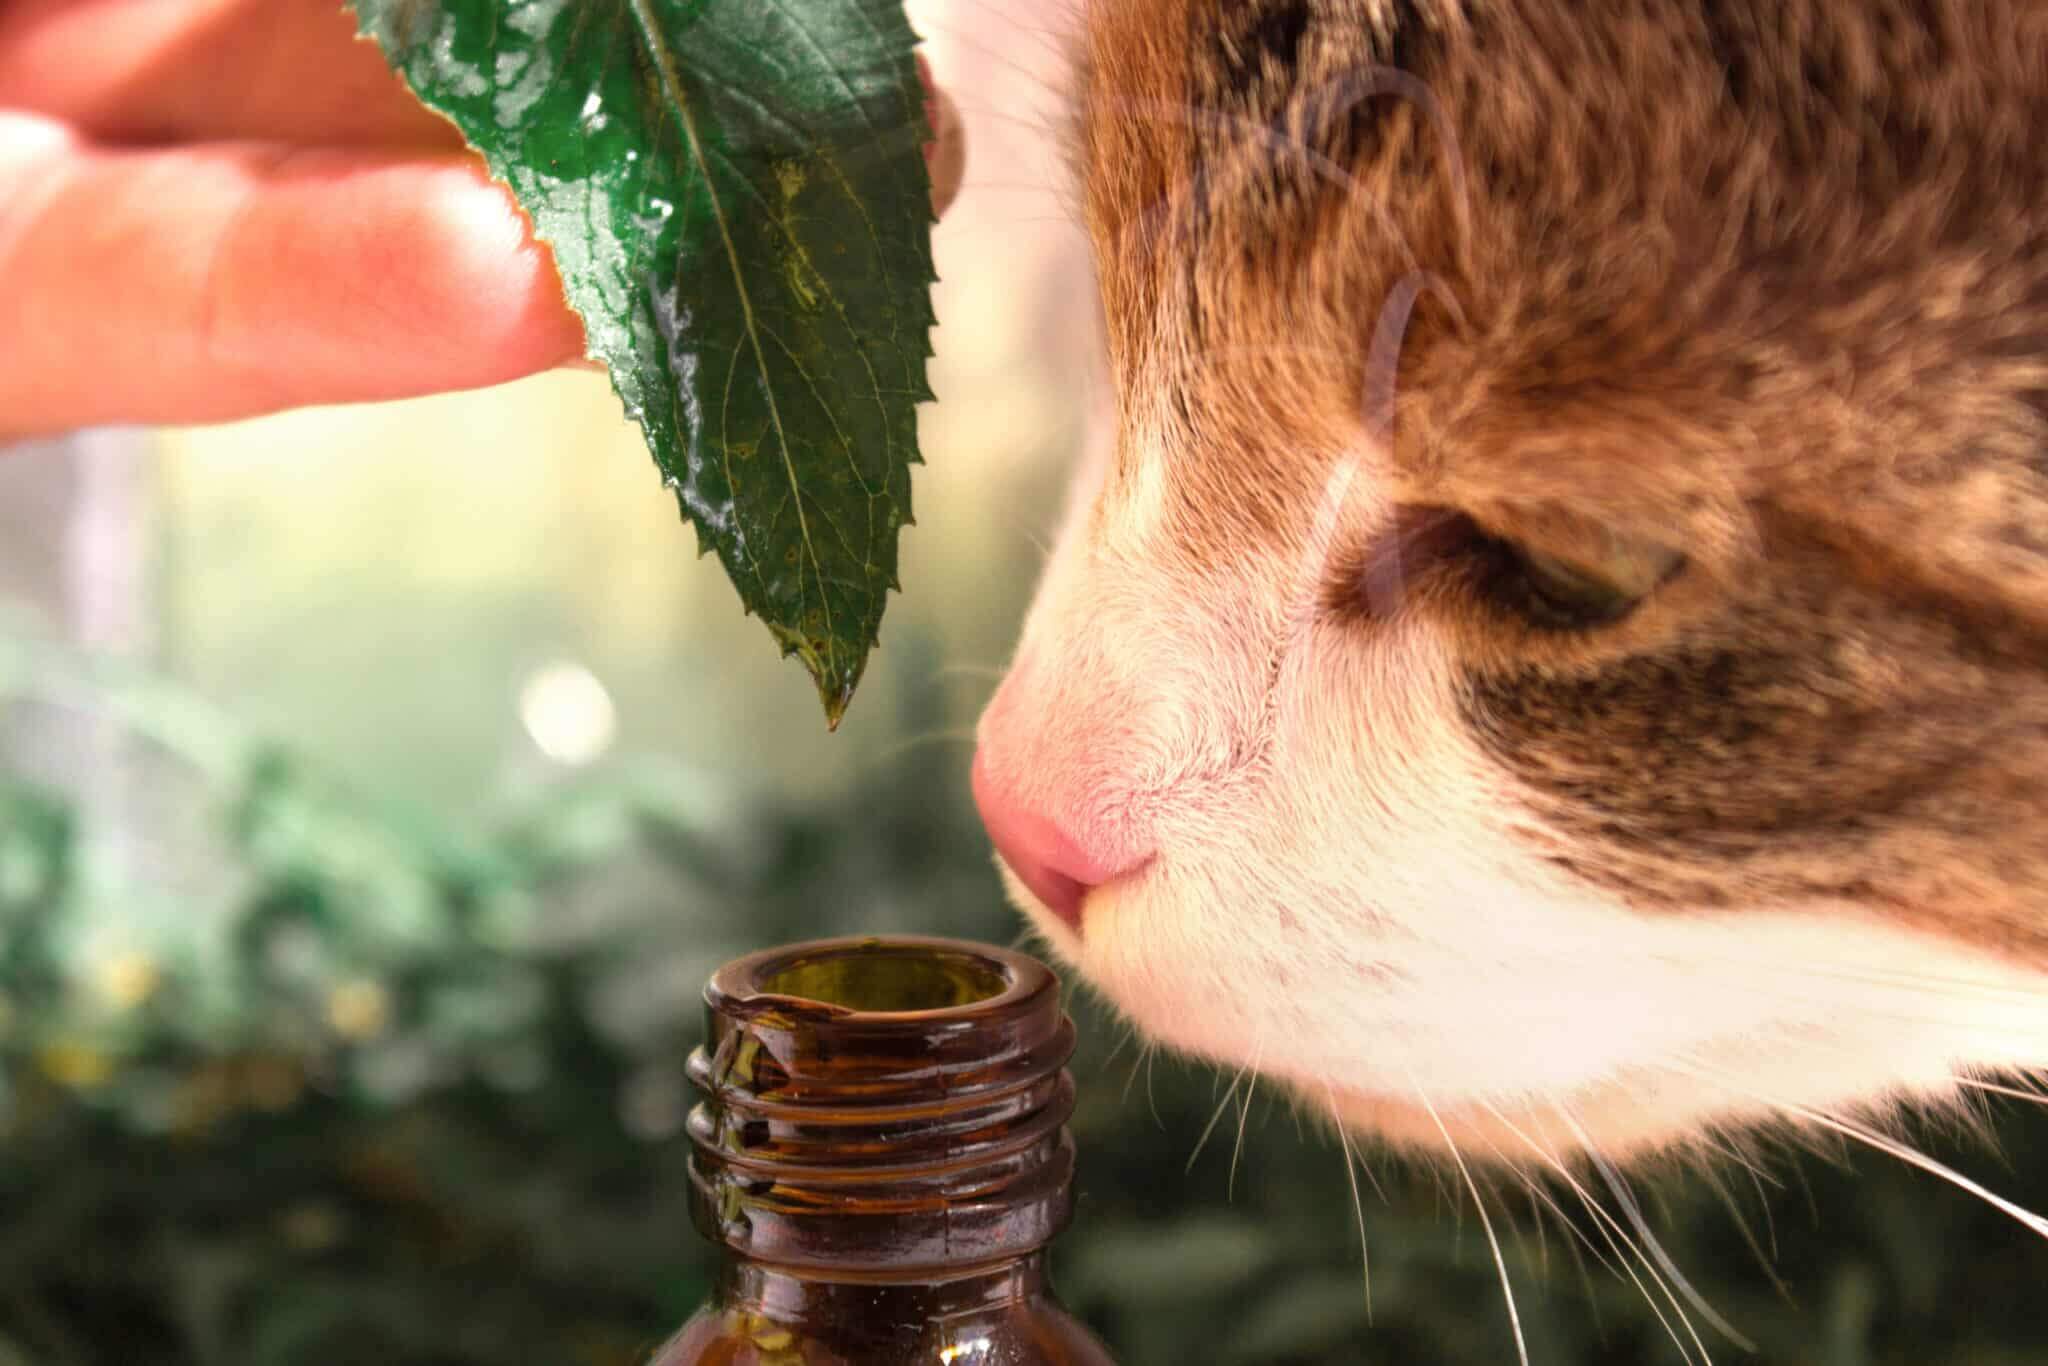 Essential oil dripping from basil leaf into glass bottle on blurred background with cat